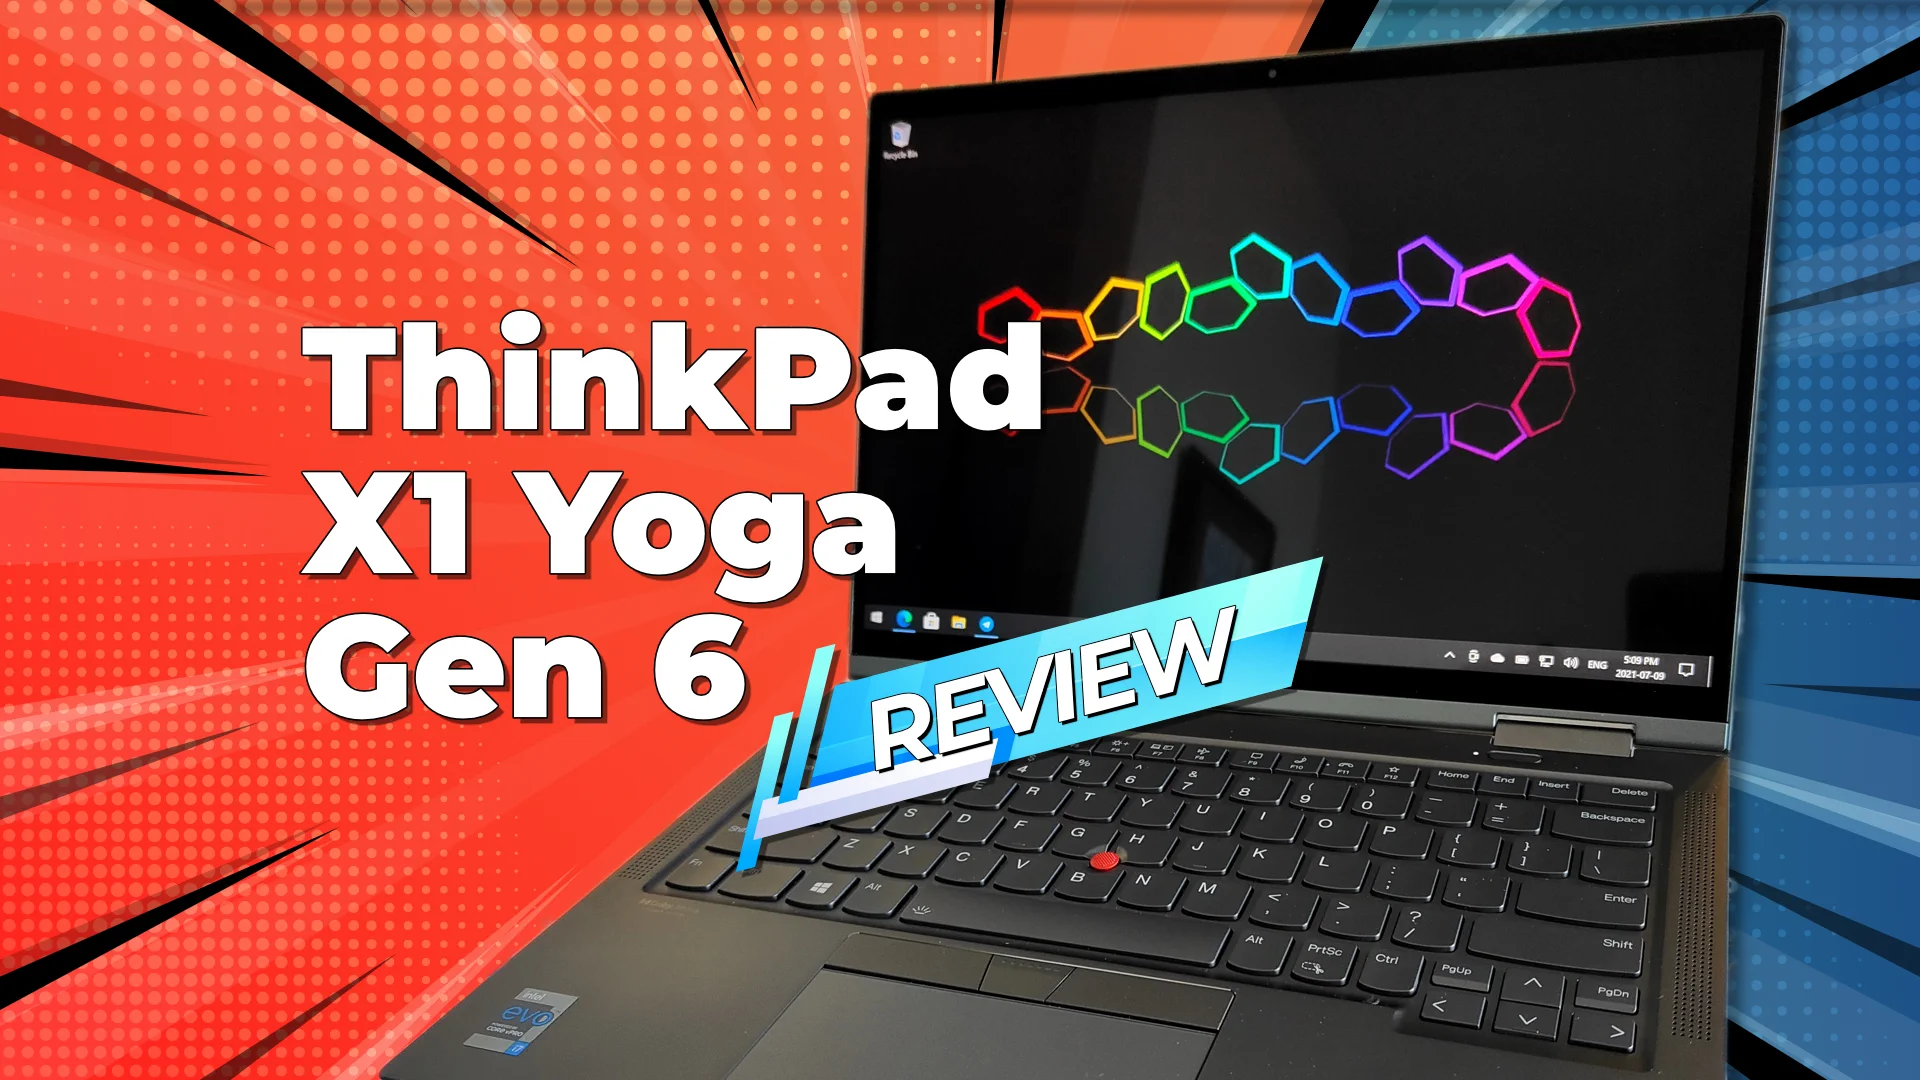 Review Lenovo ThinkPad X1 Yoga Gen 6 - Is this the 2-In-1 You Need